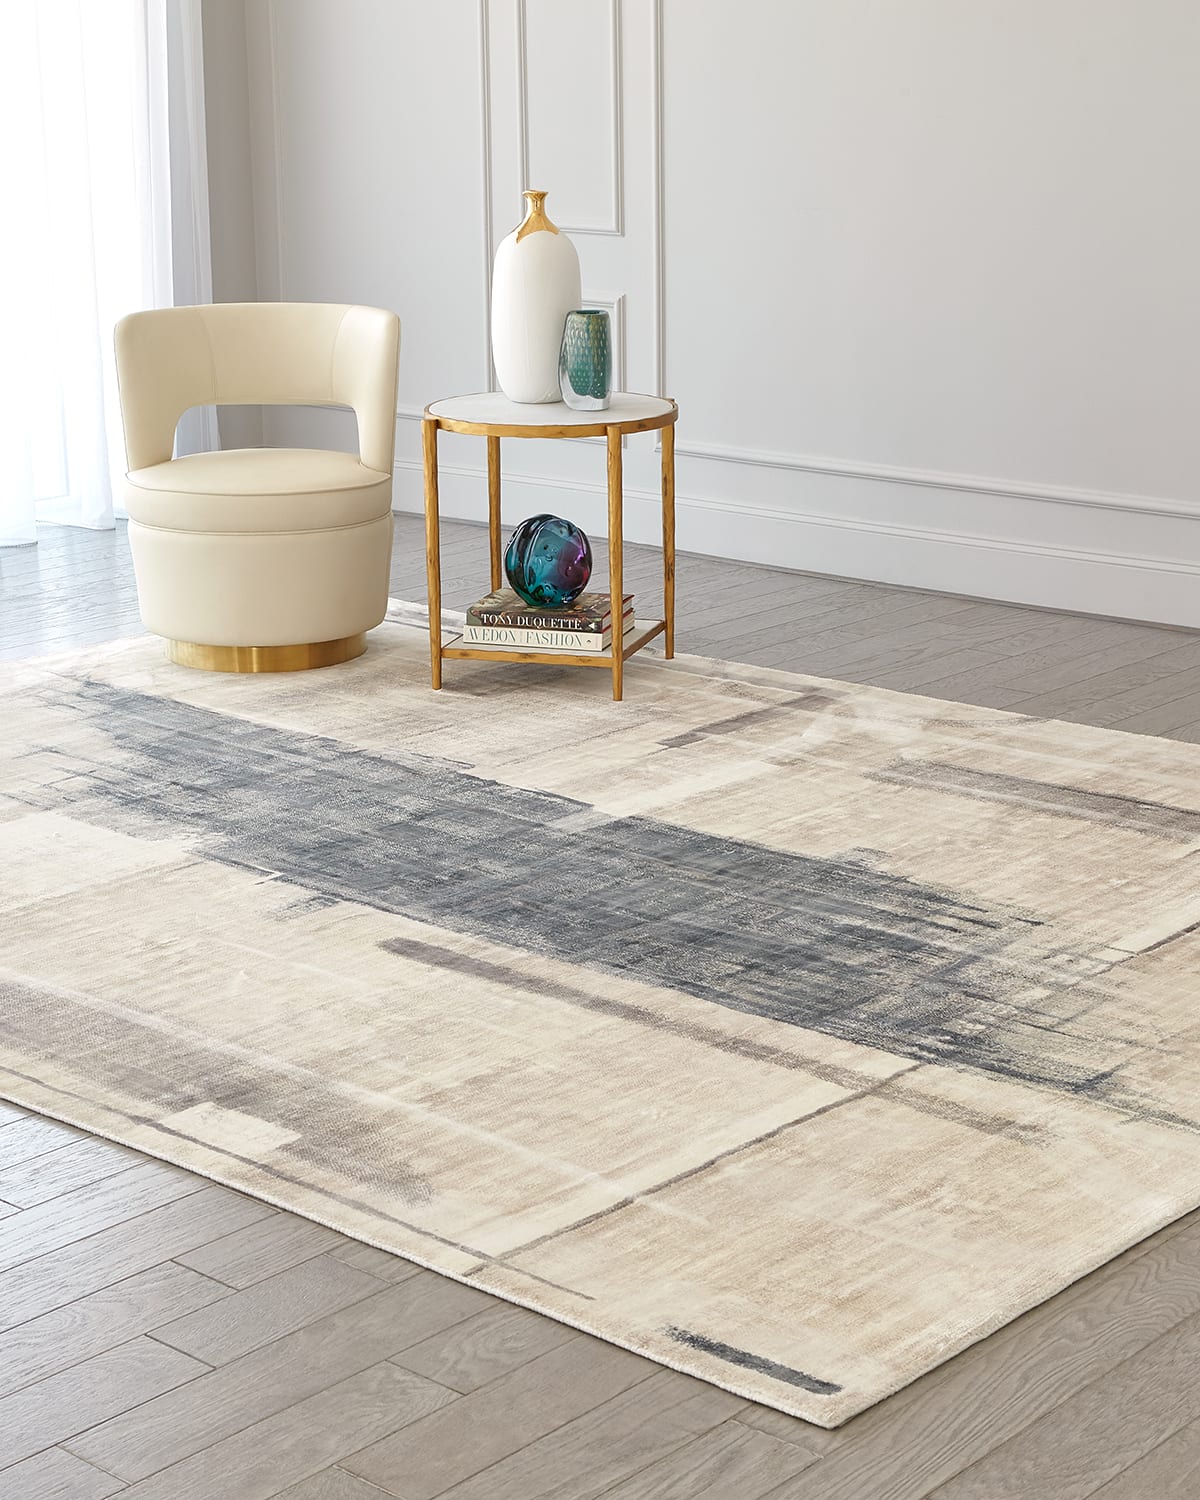 George Sellers For Global Views Art Hand-woven Rug, 8' X 10' In Gray